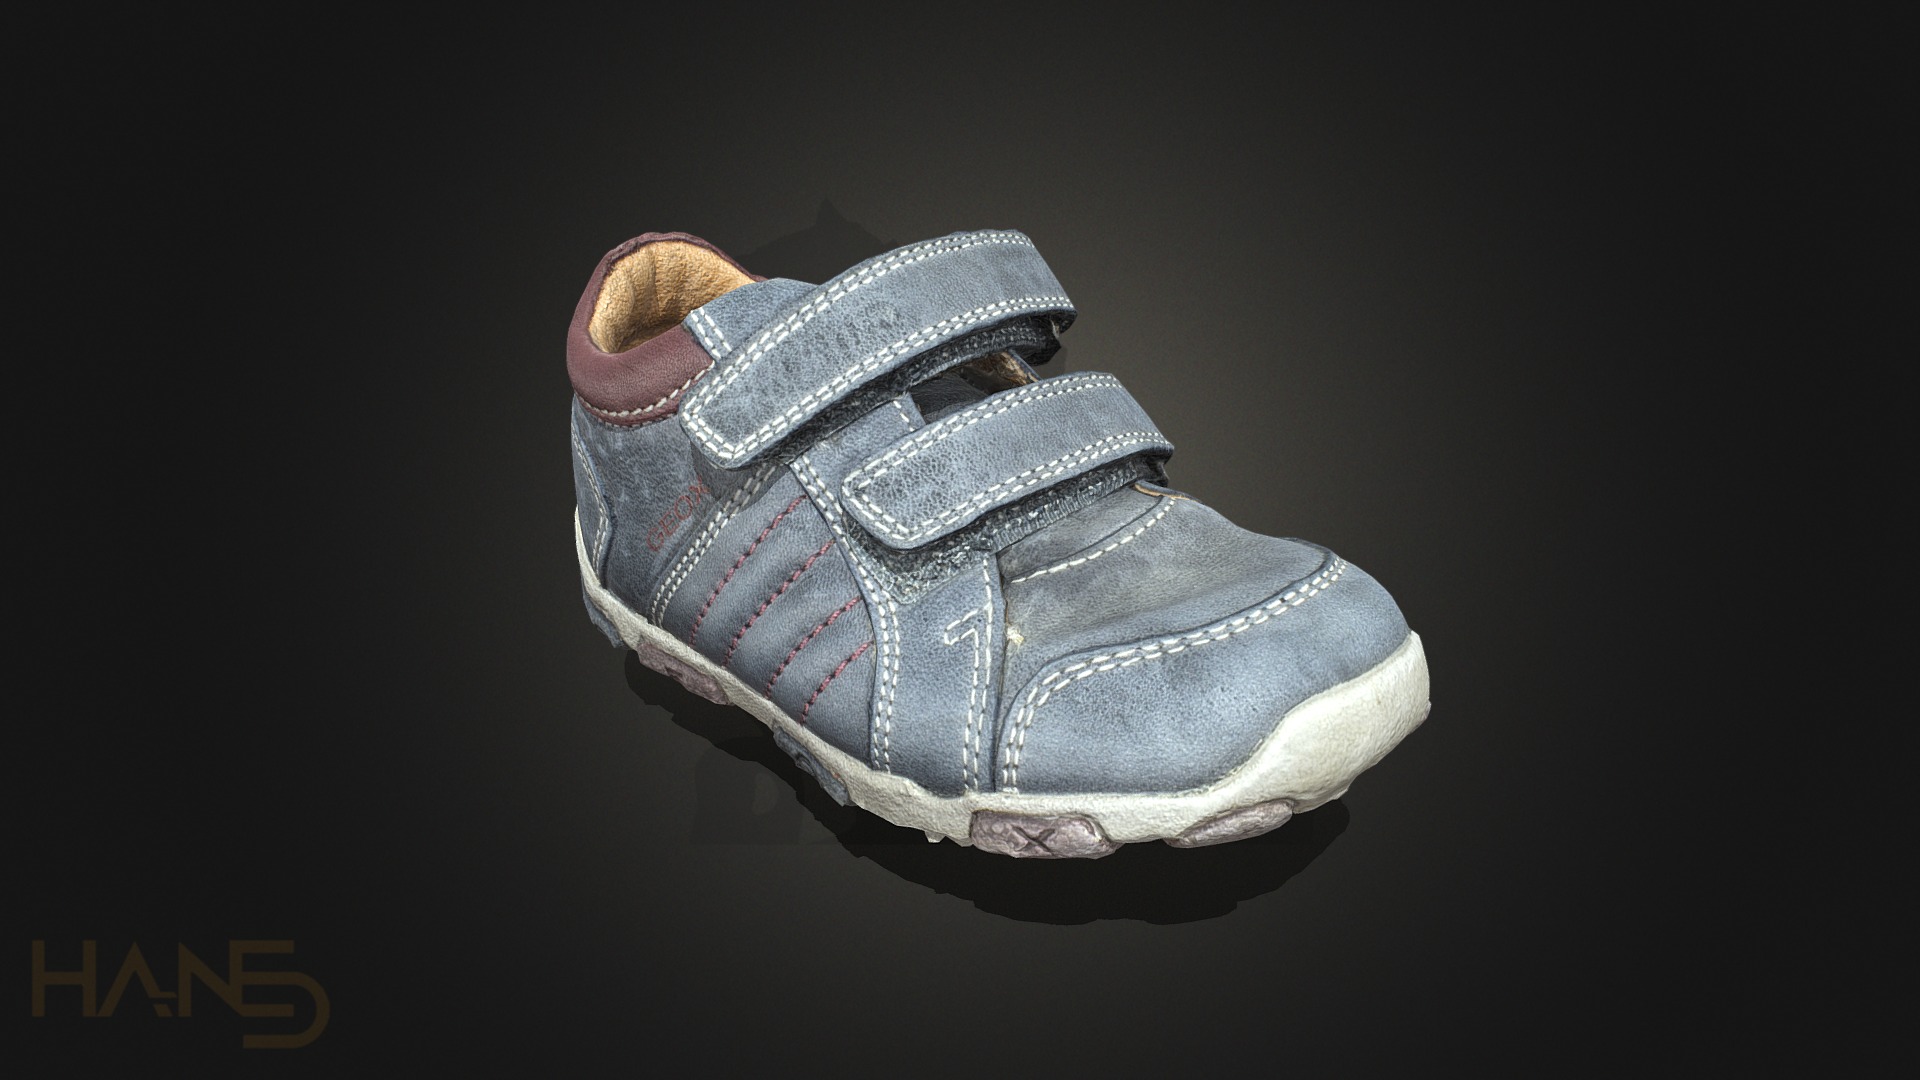 3D model Geox kid’s shoe - This is a 3D model of the Geox kid's shoe. The 3D model is about a shoe on a black background.